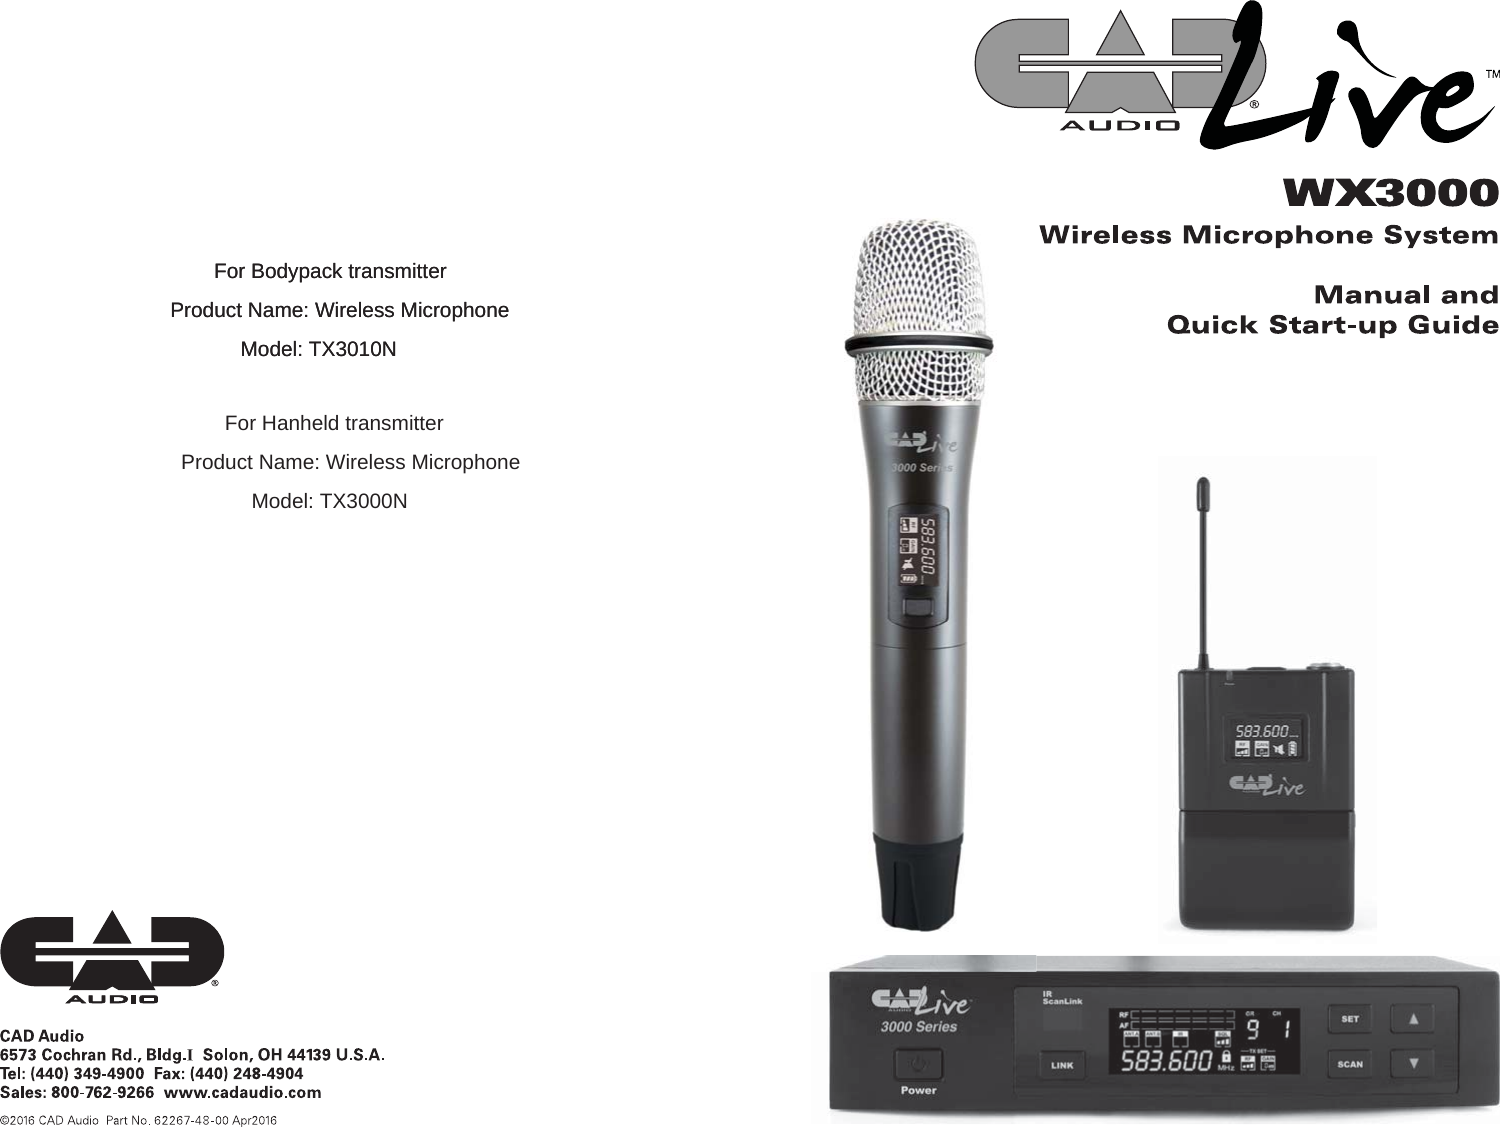 Product Name: Wireless MicrophoneFor Bodypack transmitterModel: TX3010NProduct Name: Wireless MicrophoneFor Bodypack transmitterModel: TX3010NProduct Name: Wireless MicrophoneFor Hanheld transmitterModel: TX3000N